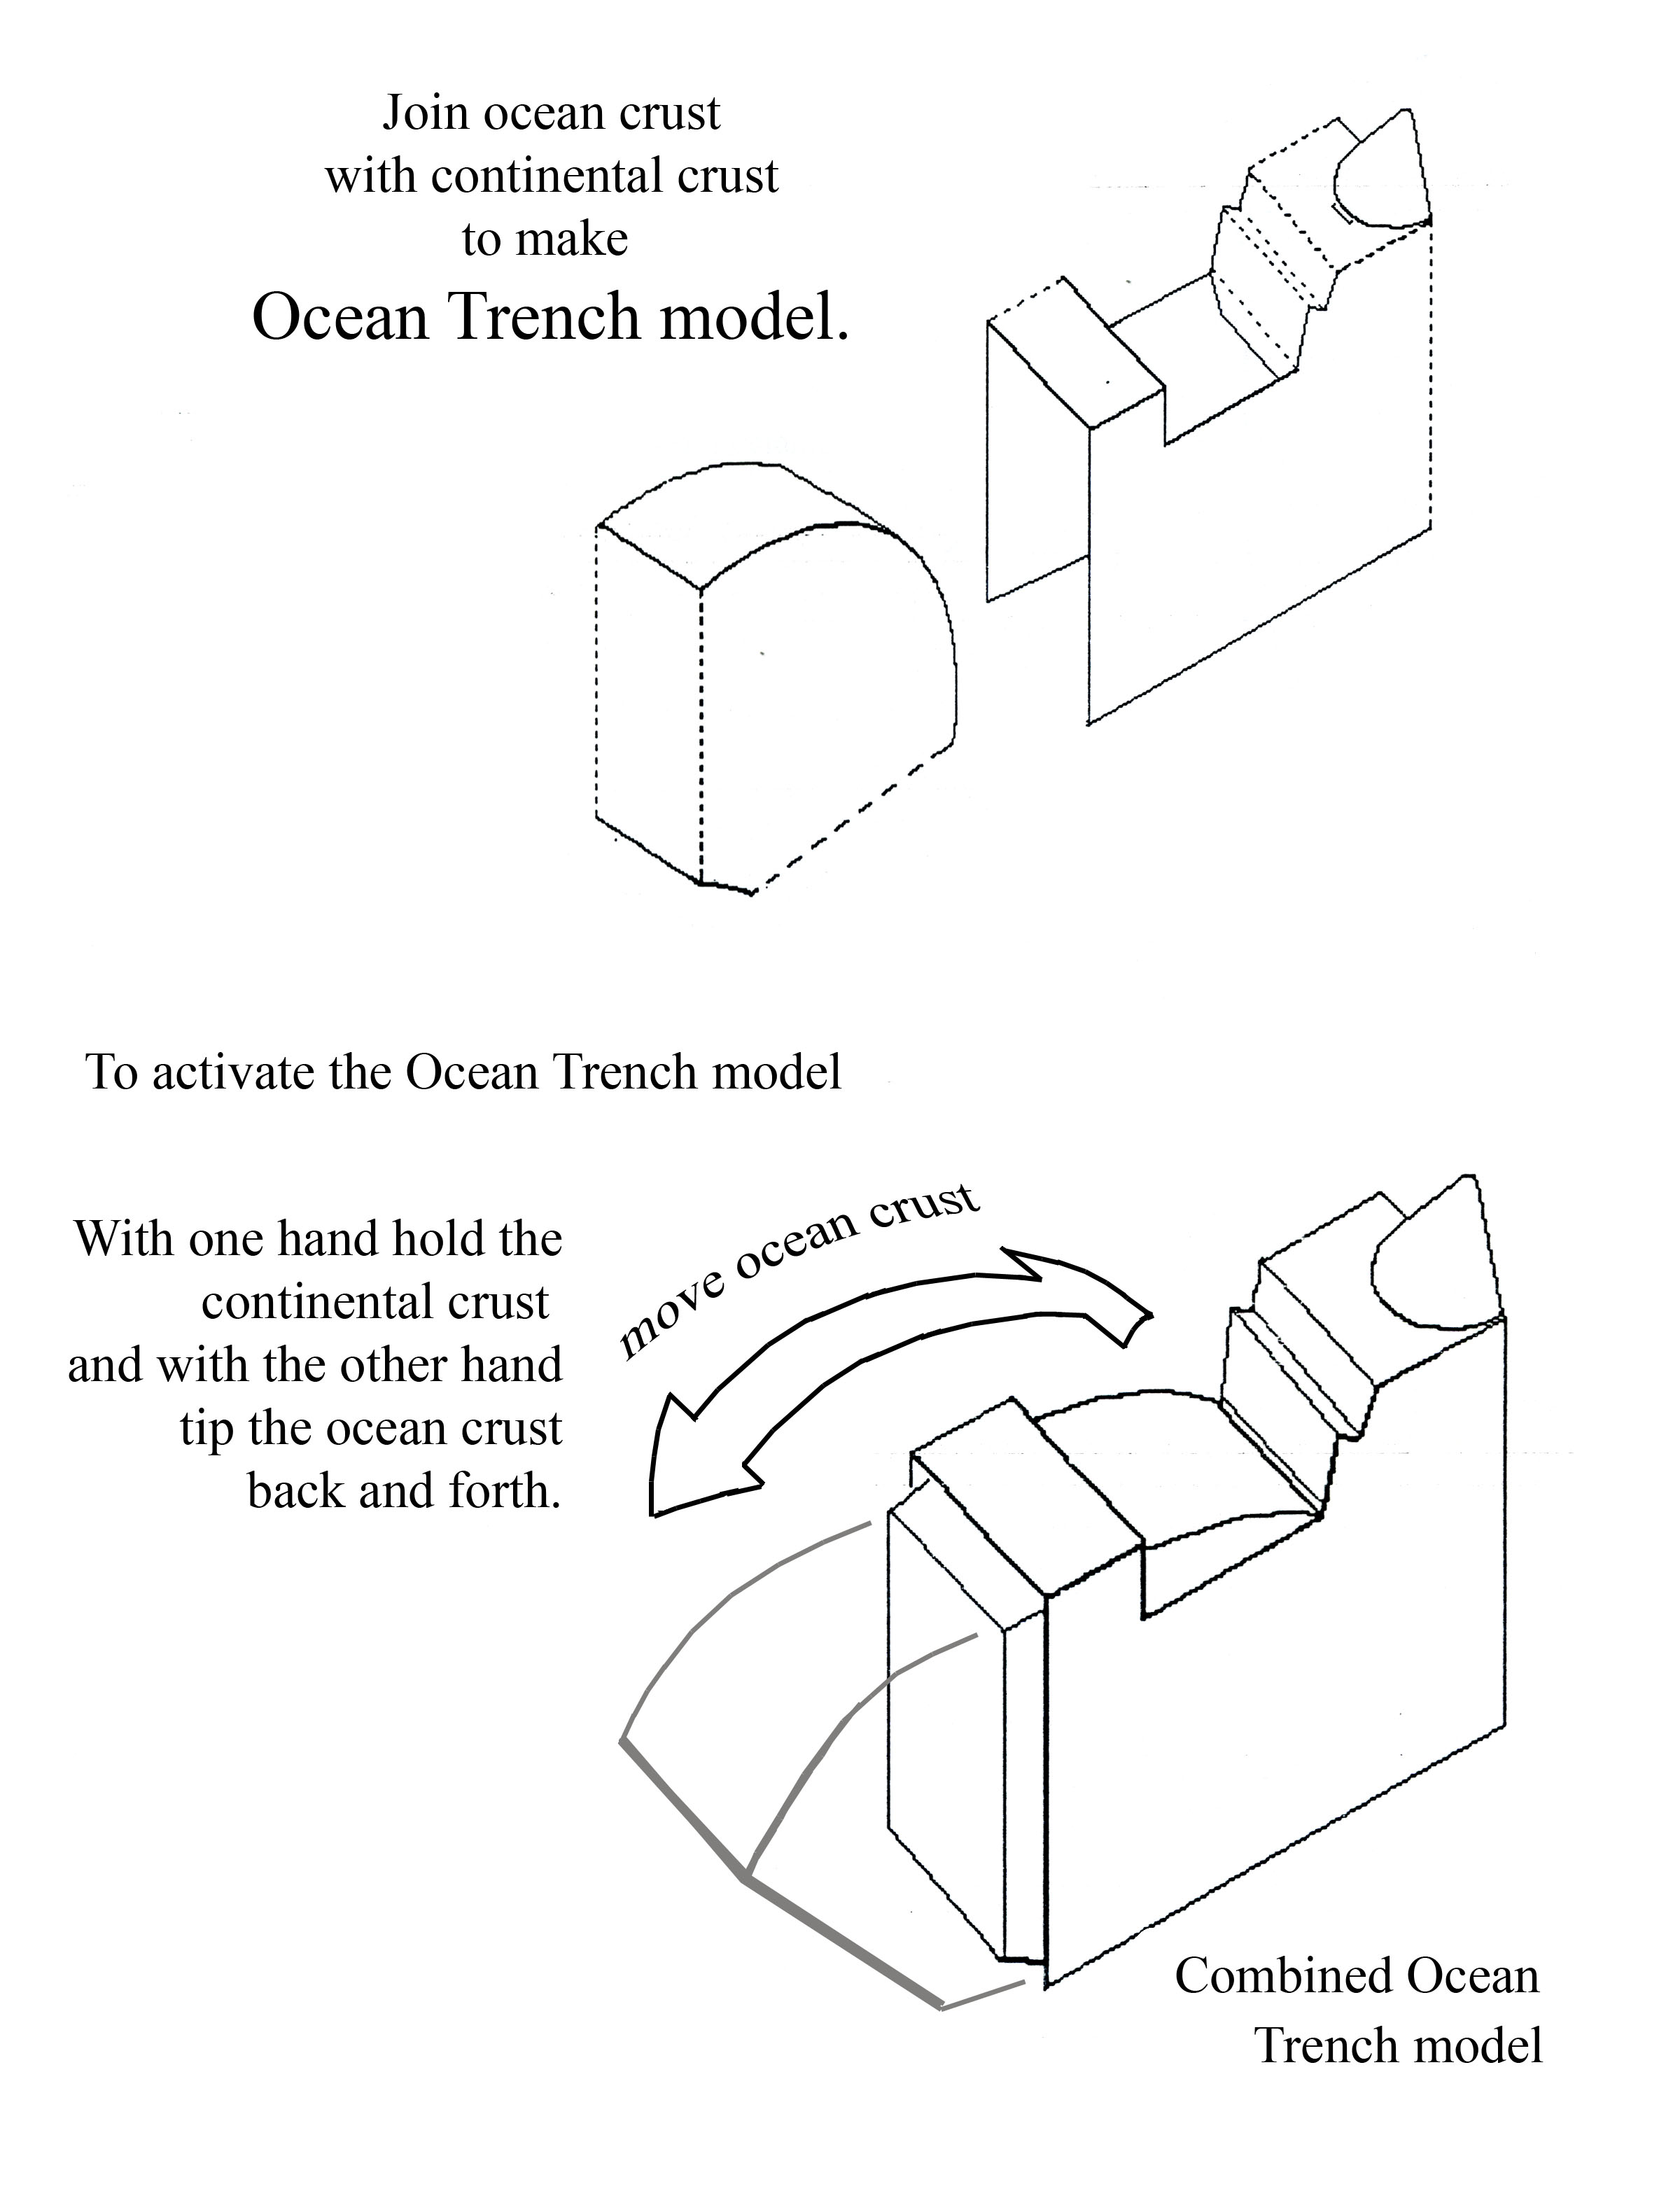 instructions for ocean trench model assembly